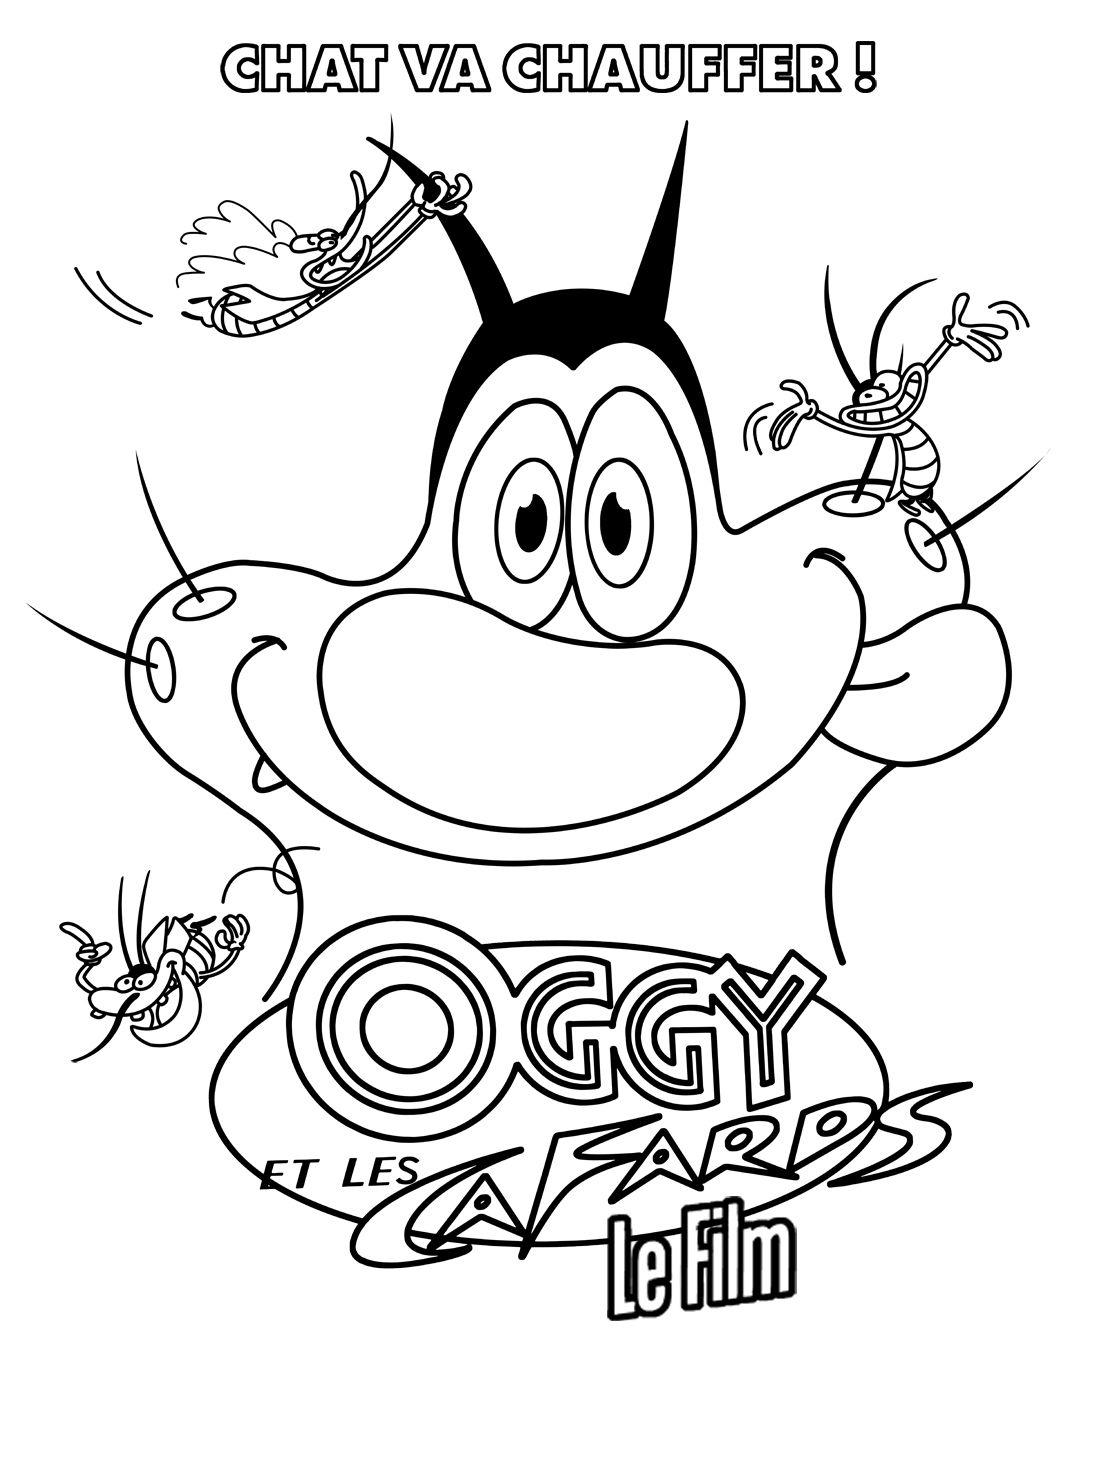 Oggy and the cockroaches coloring pages - Coloring for kids ...